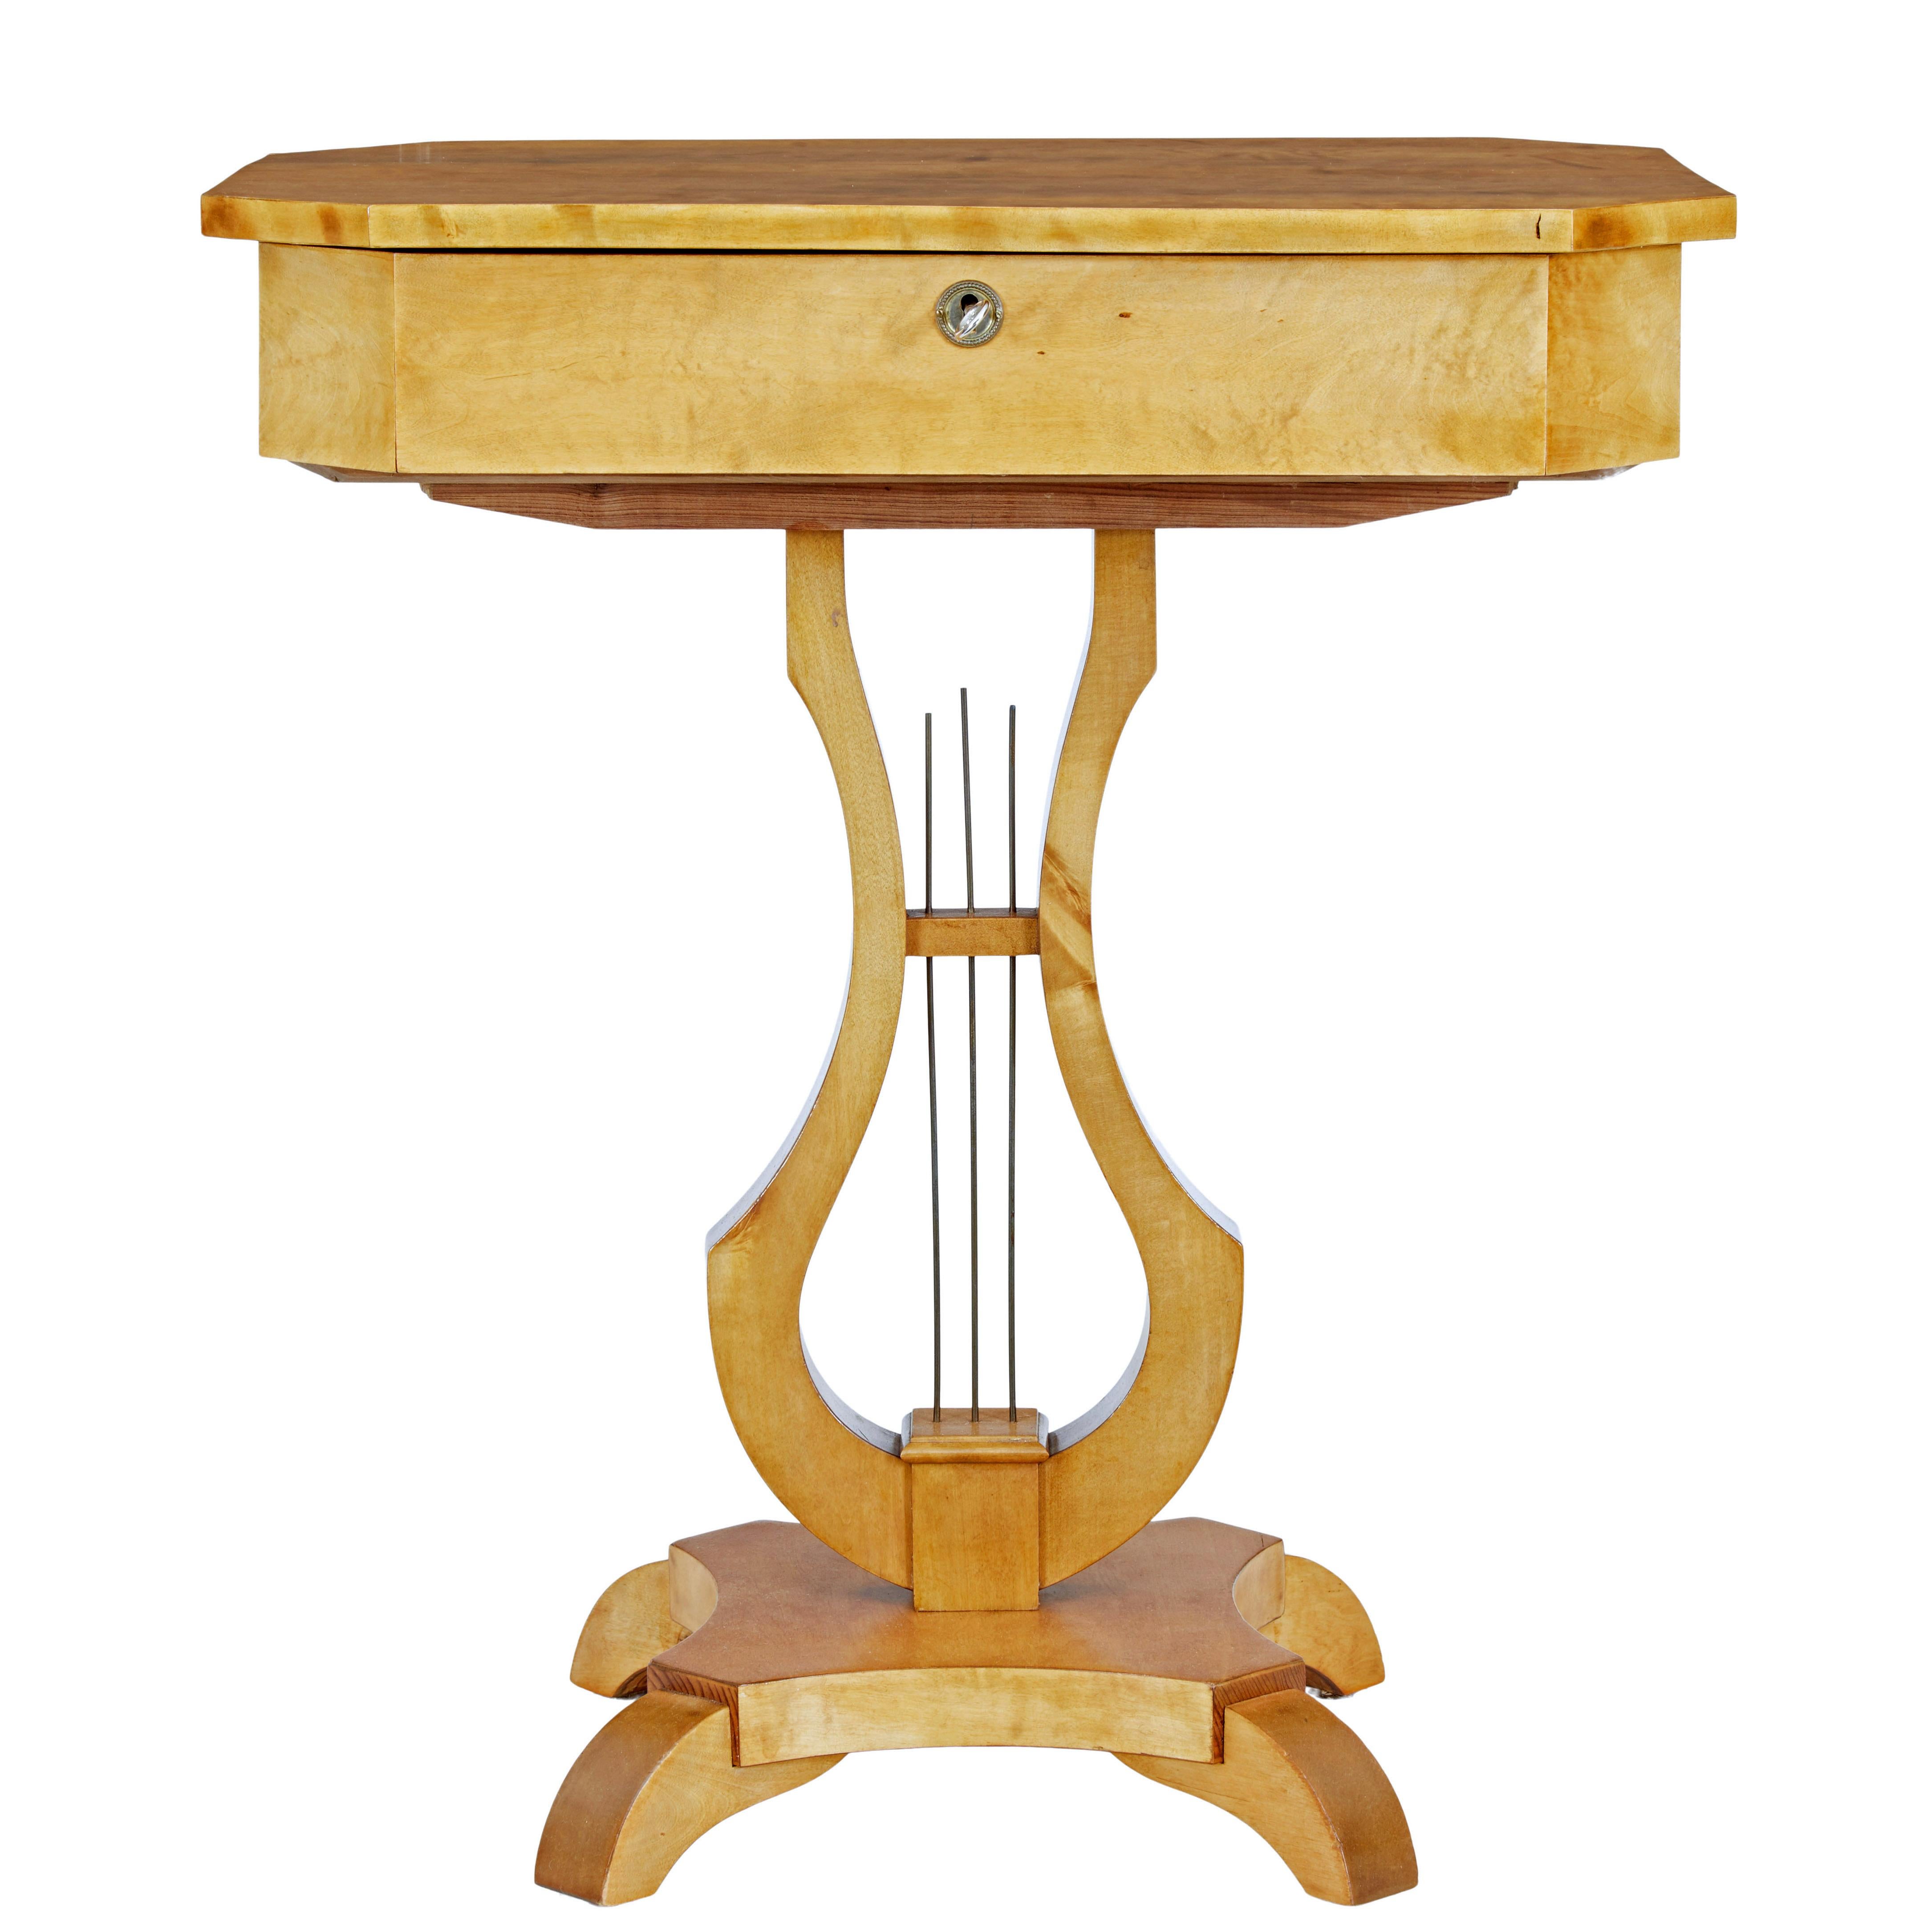 19th century Swedish birch lyre shaped occasional table circa 1890.

Rectangular top with canted corners.  Hinged lid opens to reveal a fitted interior of compartments arranged around a central pot.  Top is supported by a lyre shaped stand with